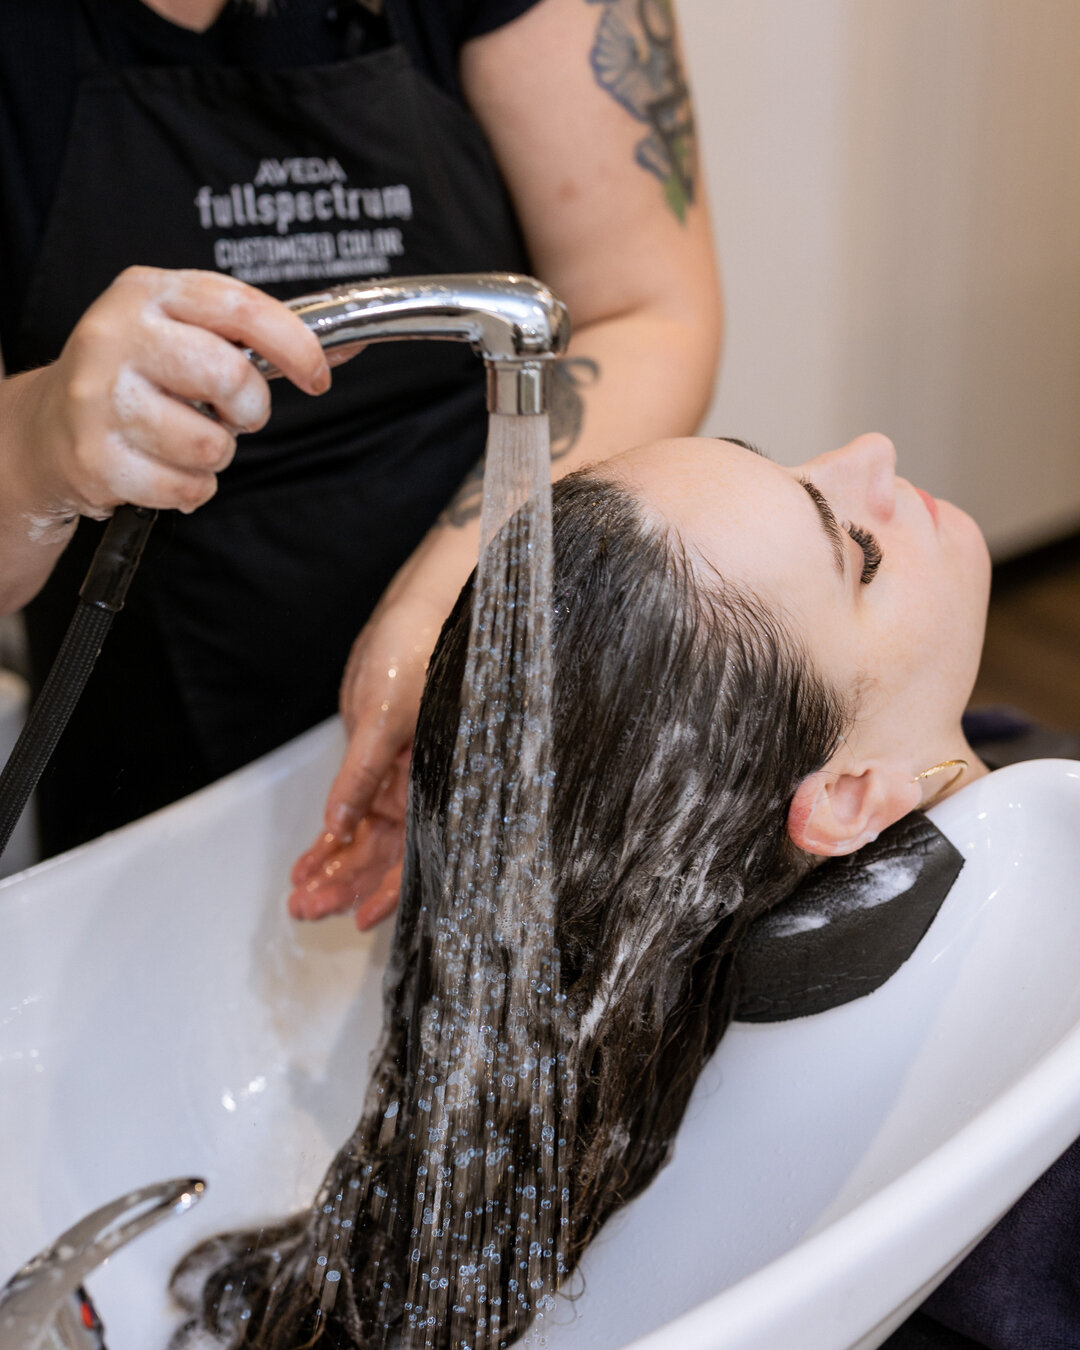 Why does getting your hair washed at the salon feel so damn good? ​​​​​​​​​
Well there's a scientific reason for the overwhelming pleasure response: Is down to the nerve endings in your scalp sending information to the 'sensory cortex' (the brain's &